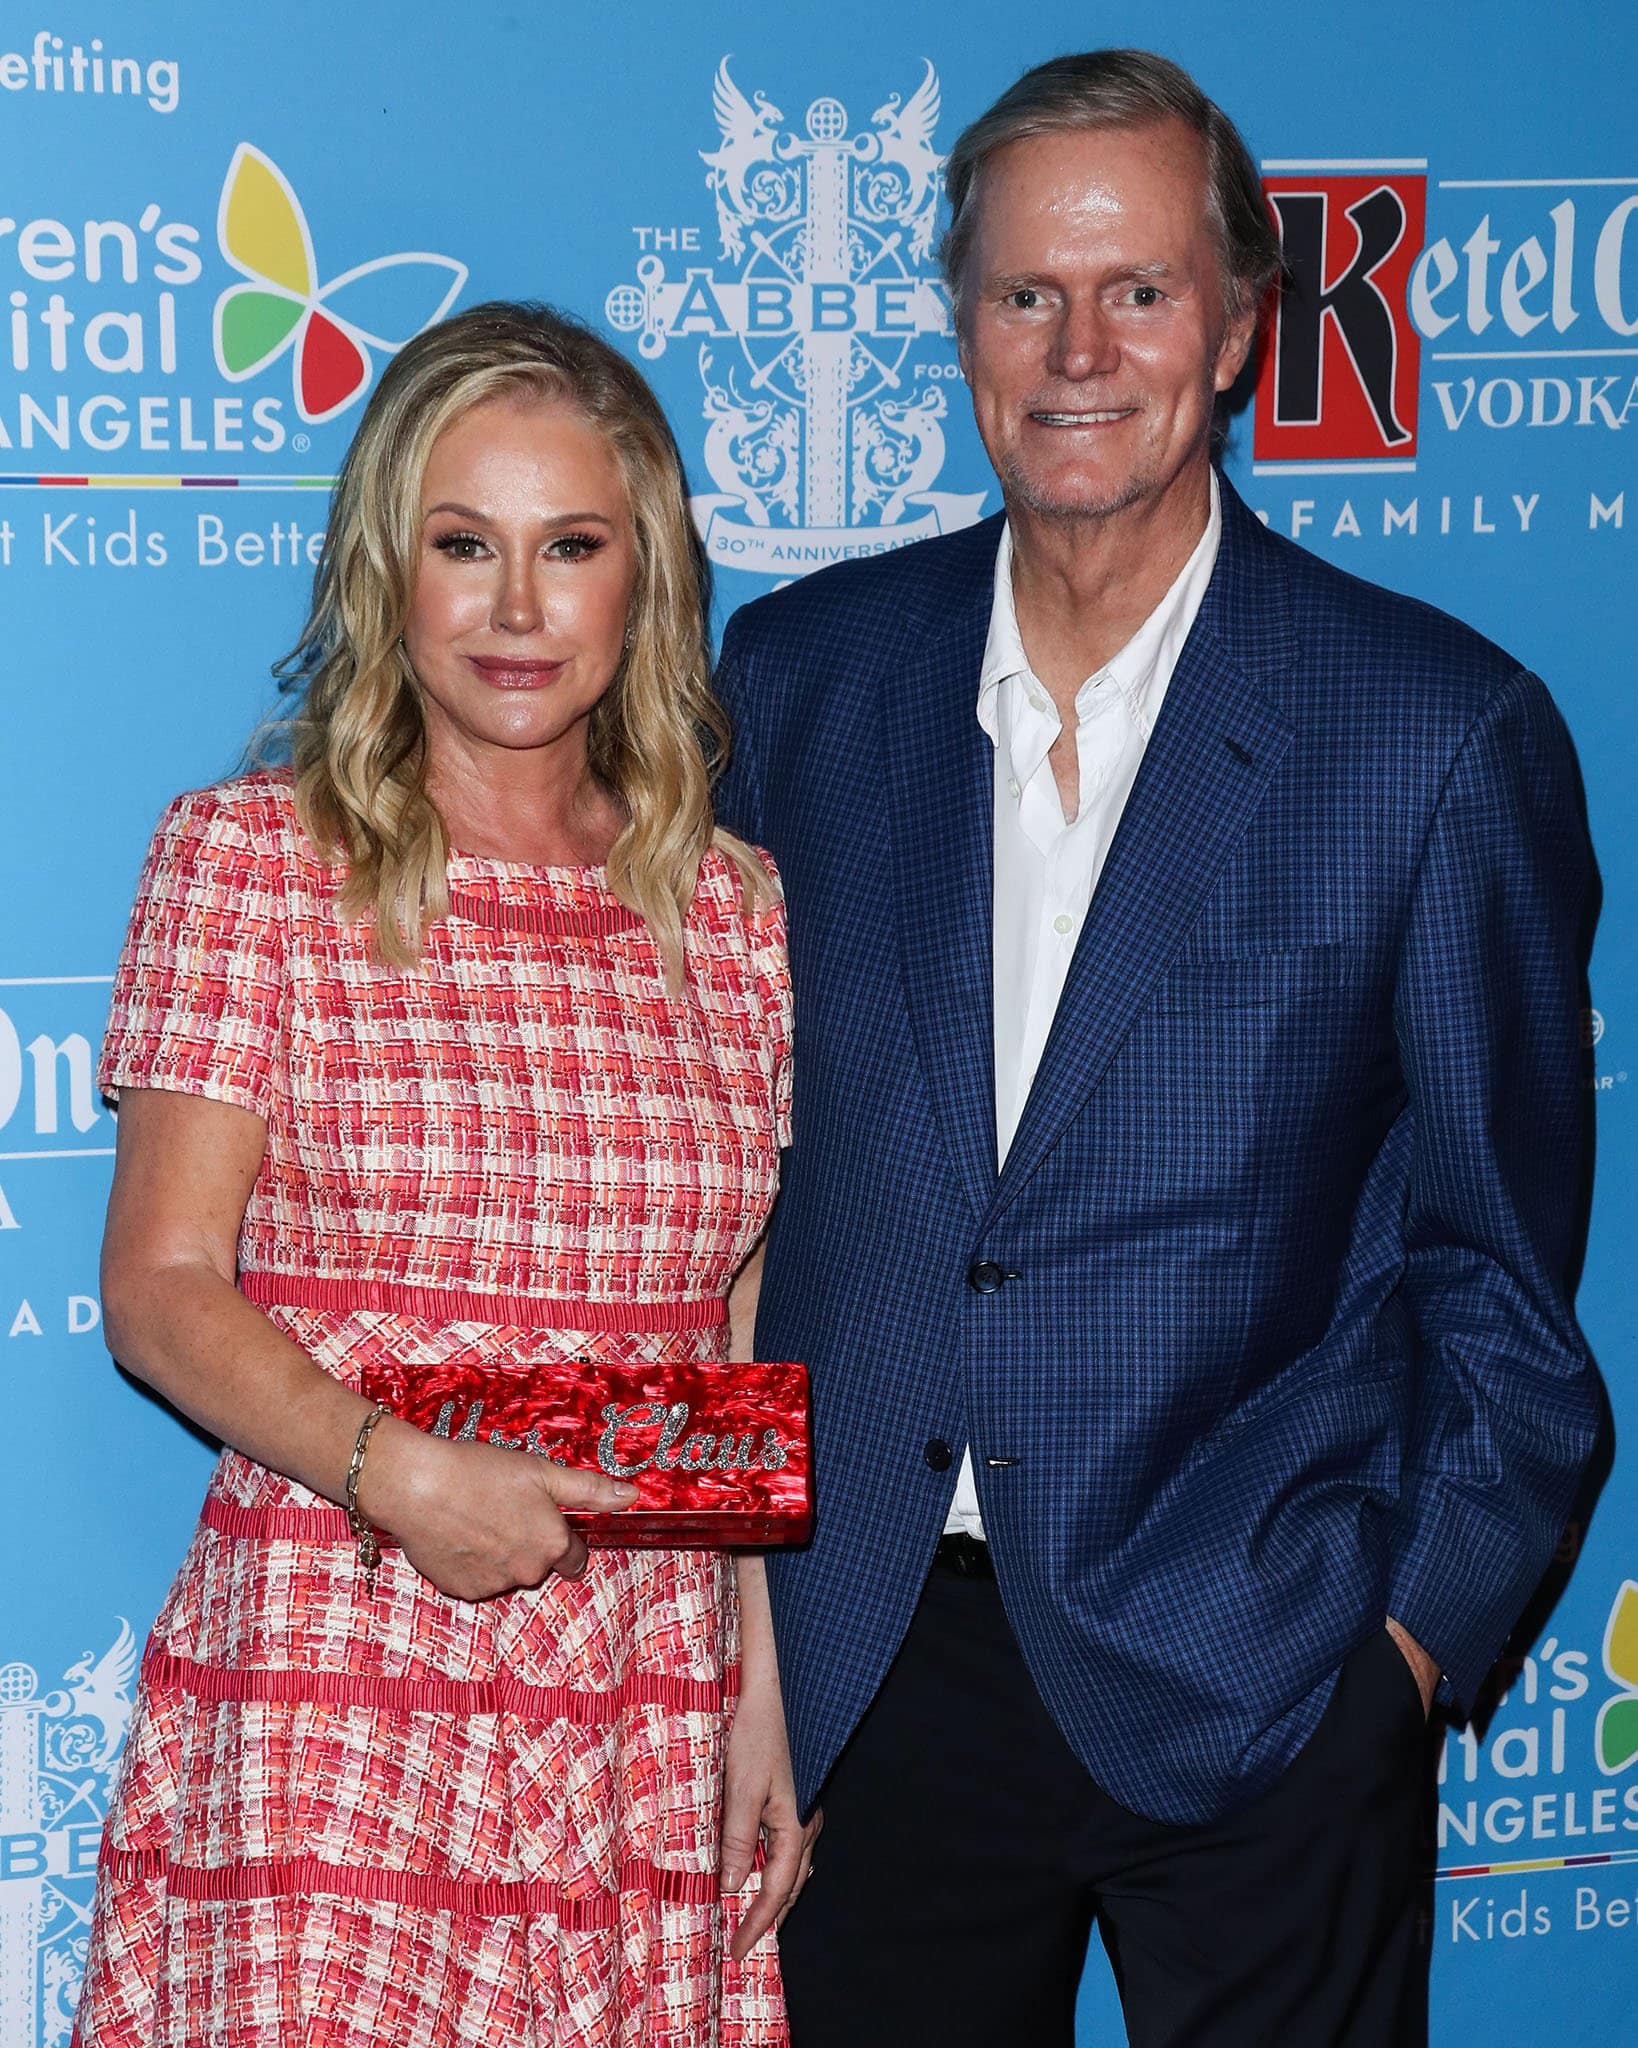 Richard and Kathy Hilton have an estimated net worth of $350 million